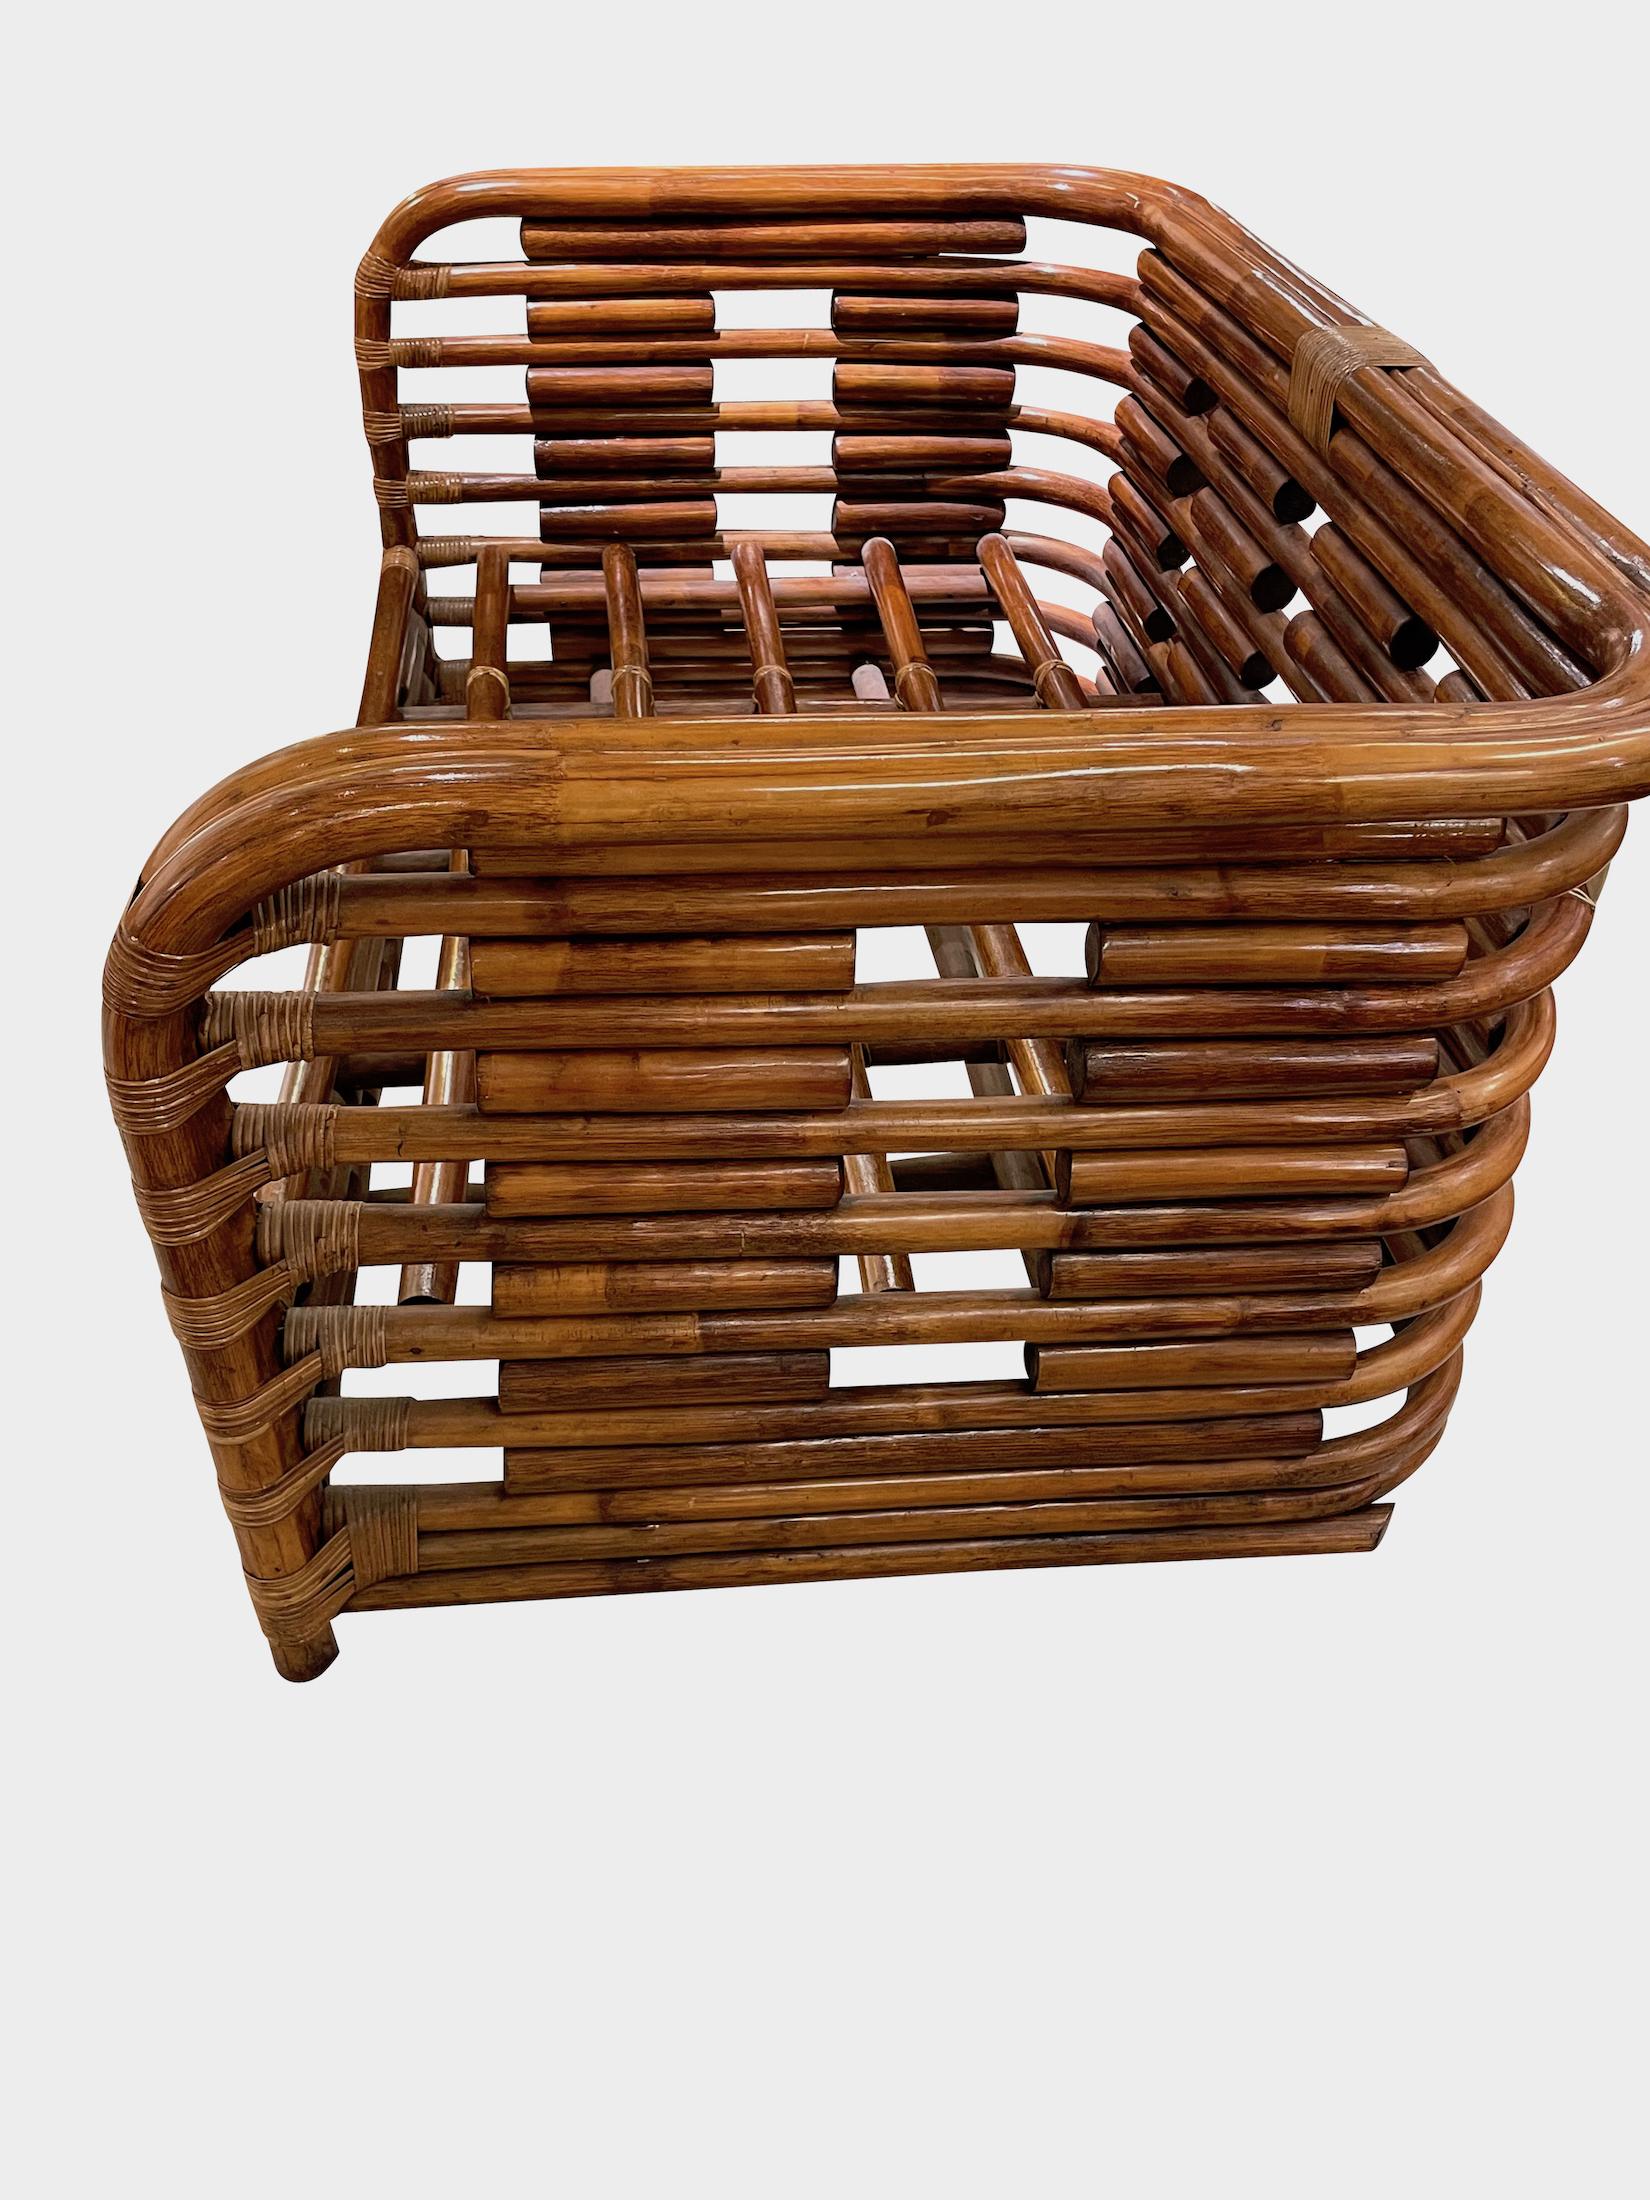 Rattan Set of Six Seating Set, France, 1950s For Sale 1